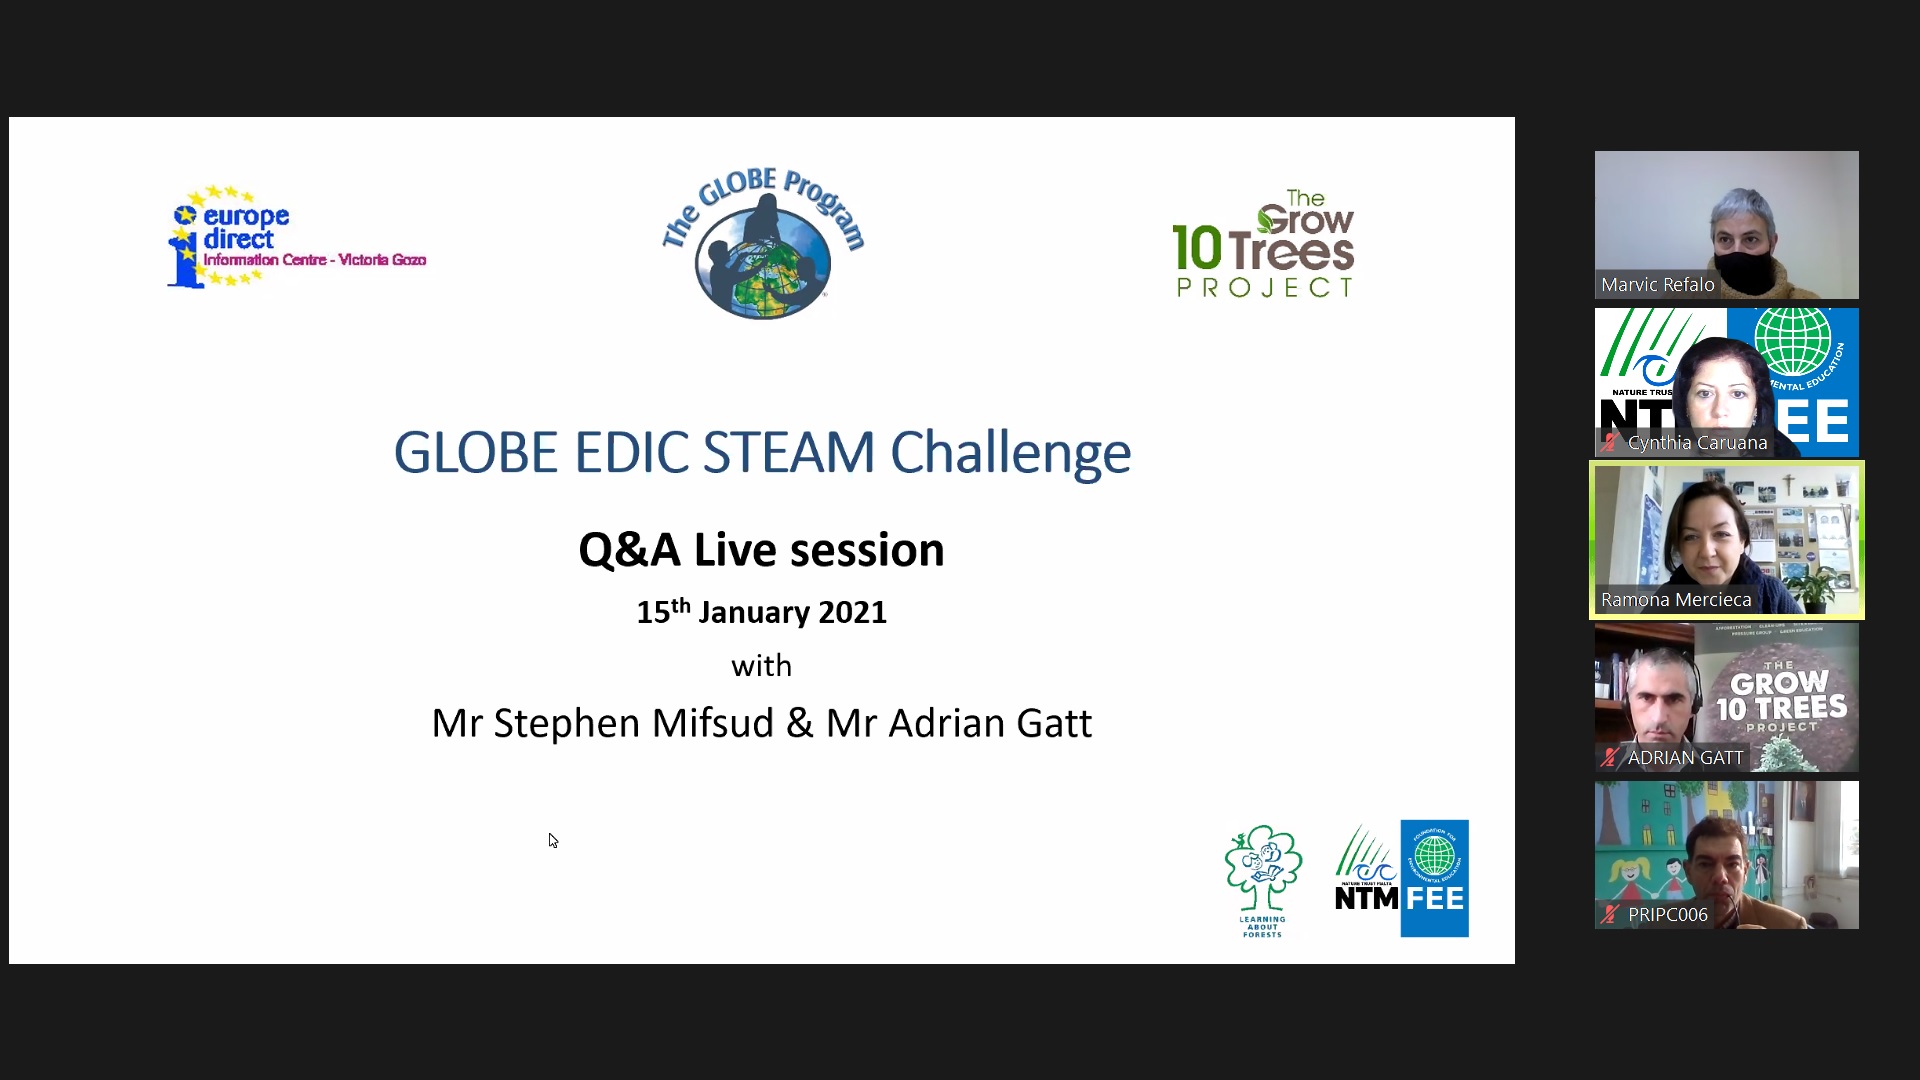 Screenshot from meeting for the GLOBE EDIC STEAM Challenge